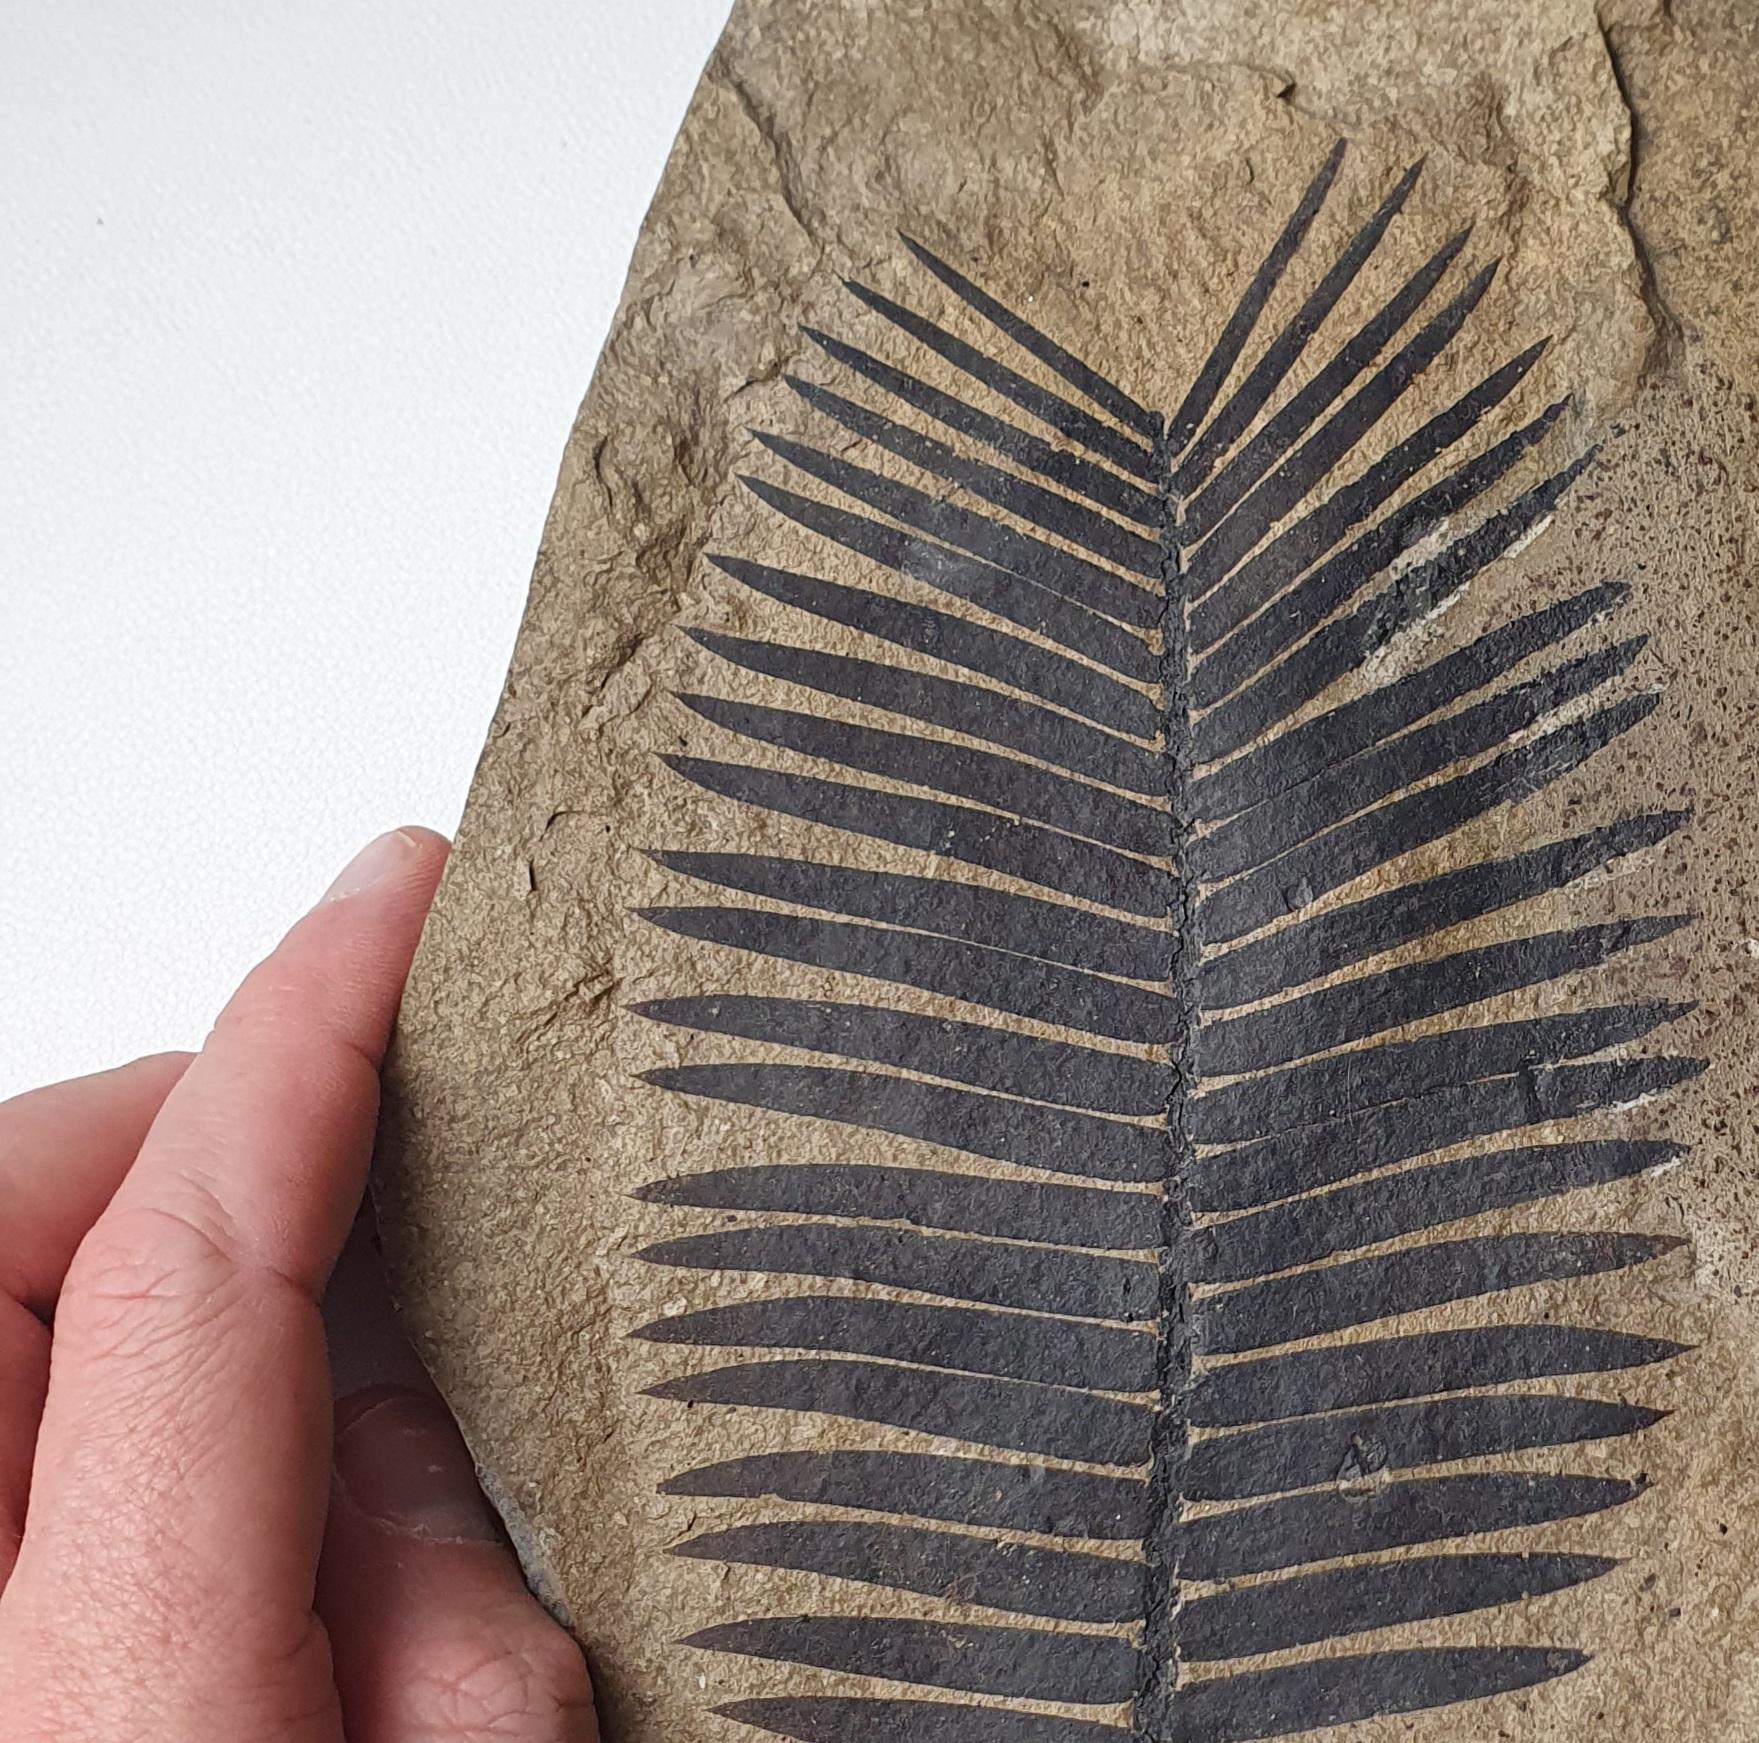 Incredibly beautiful Cycadeoids fossil leaves Zamites feneonis

There is no restoration or repair. The color is 100% original.
This plant has grown 150 million years ago, when Dinosaur ruled the earth !
Late Jurassic (Kimmeridgian),